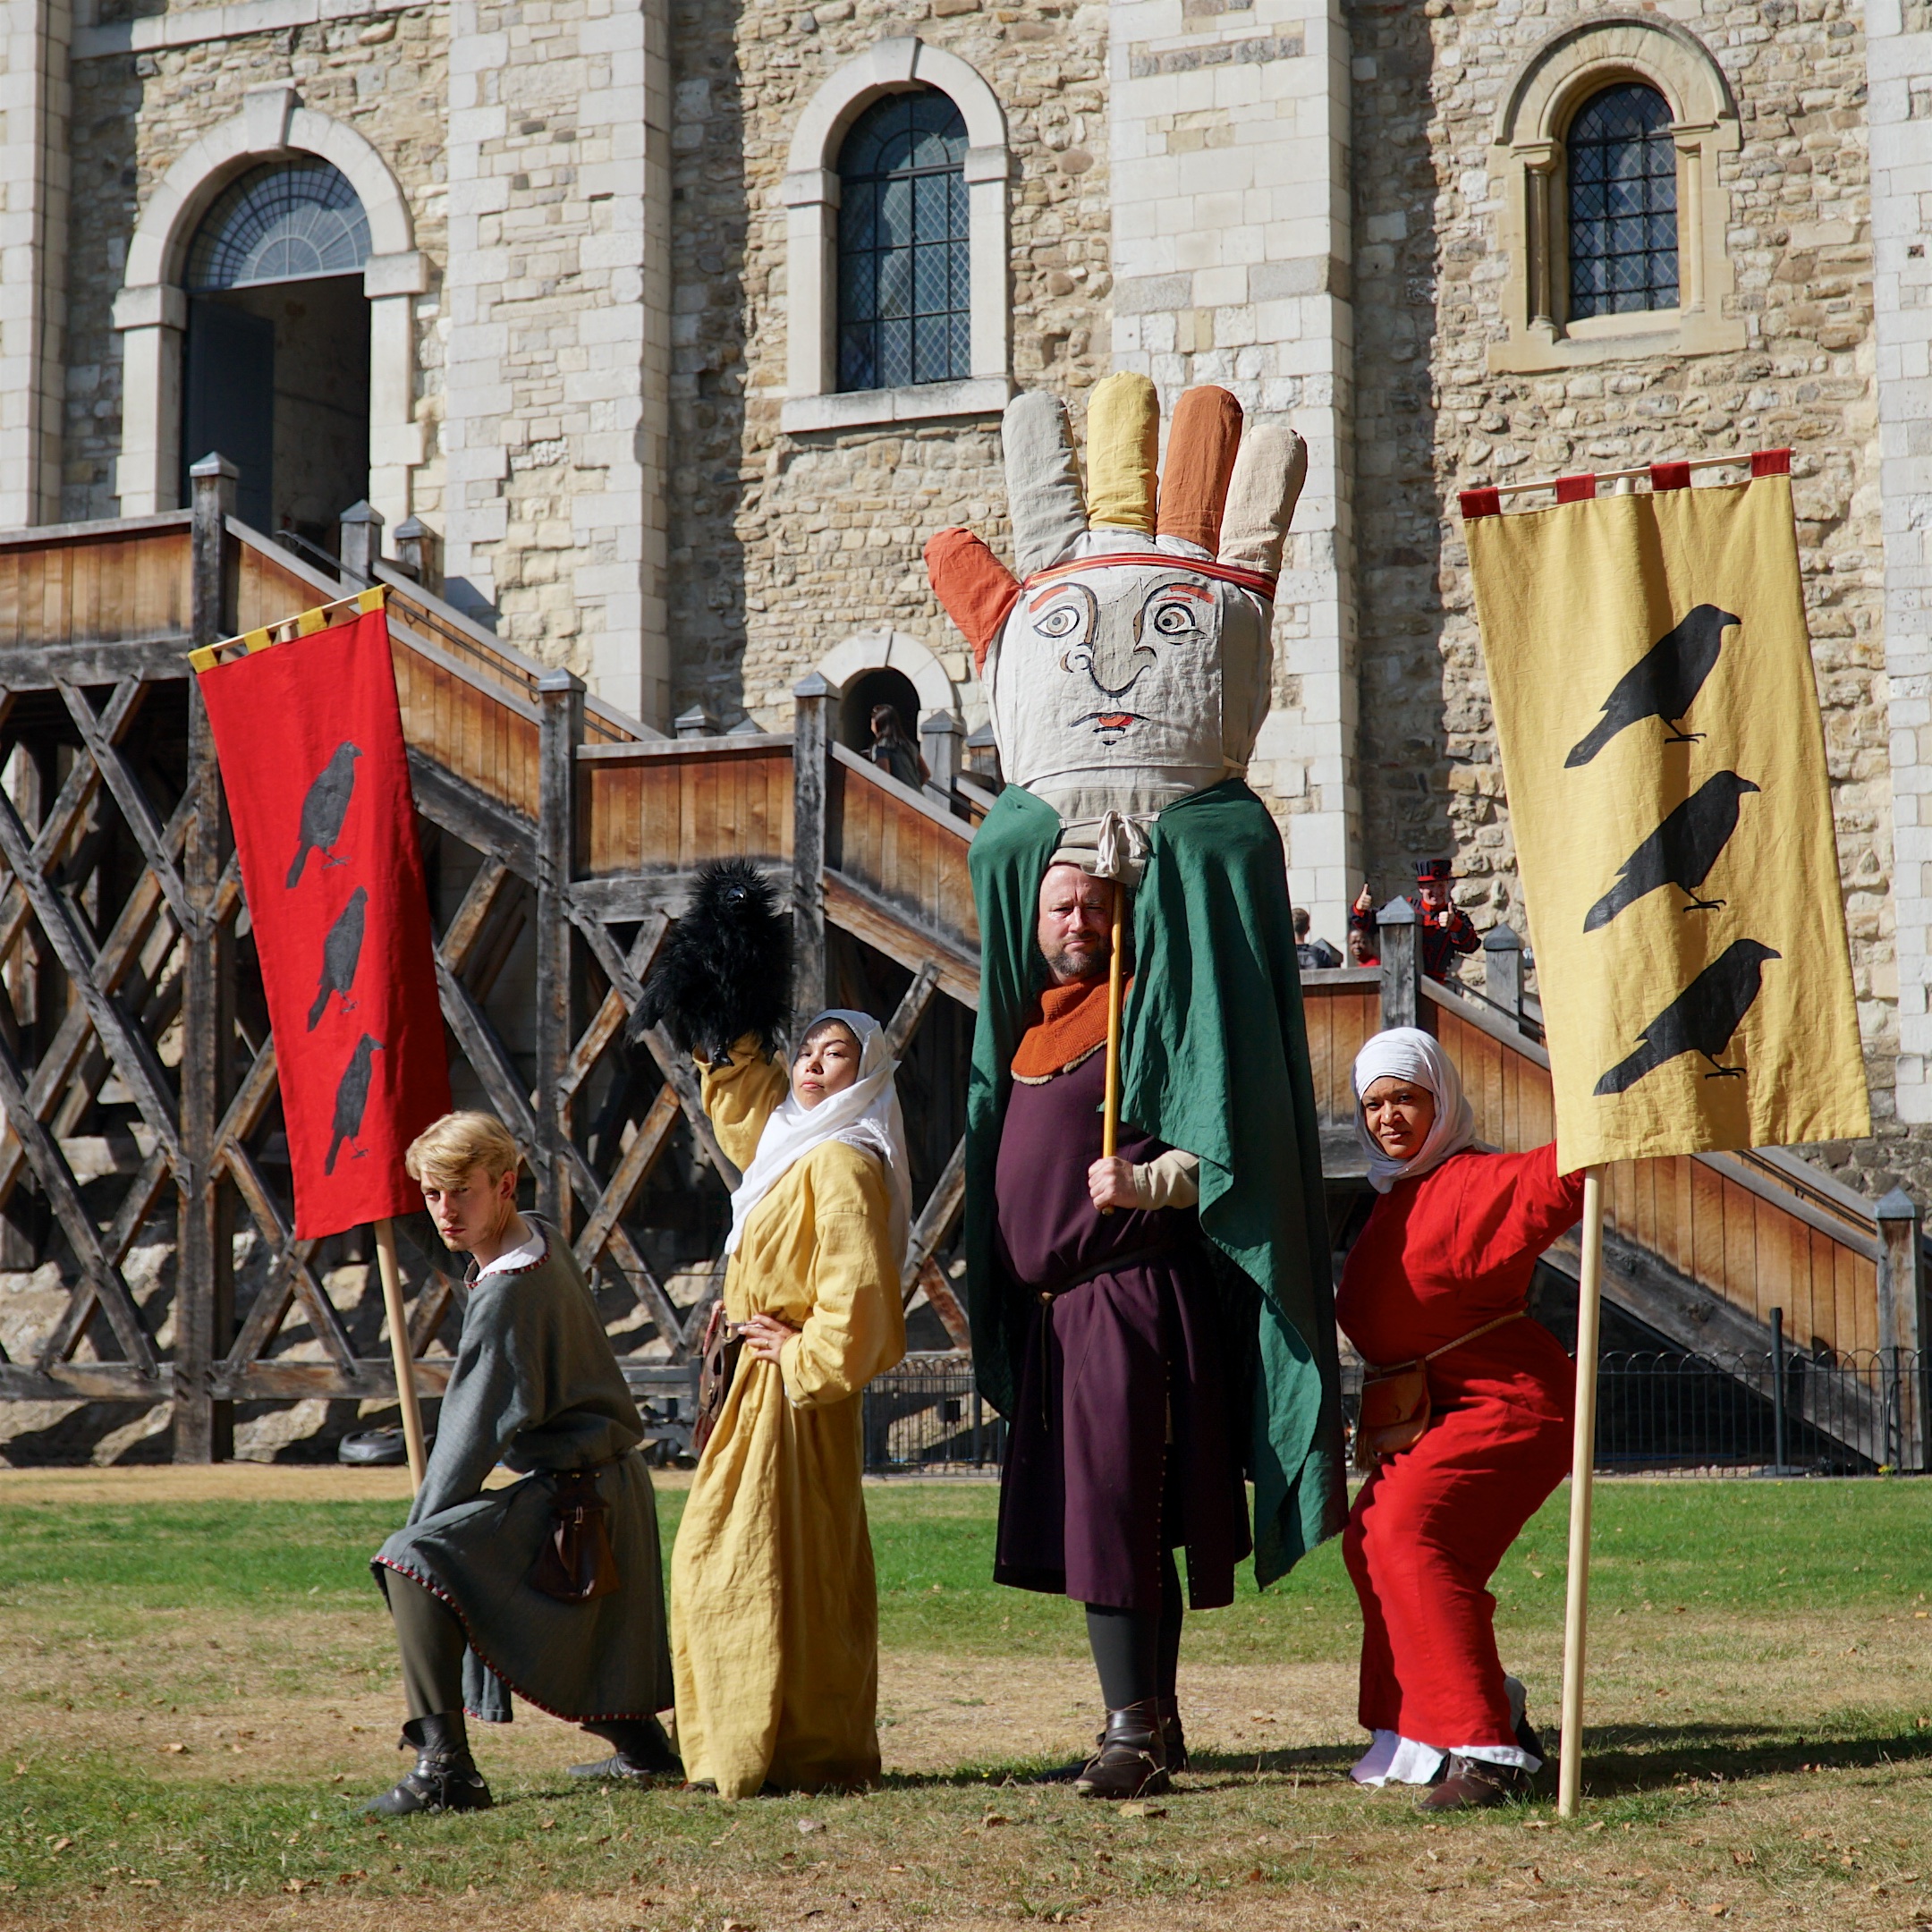 Four medival characters with flags and a giant glove puppet stand in front of the White Tower at the Tower of London in the Sun